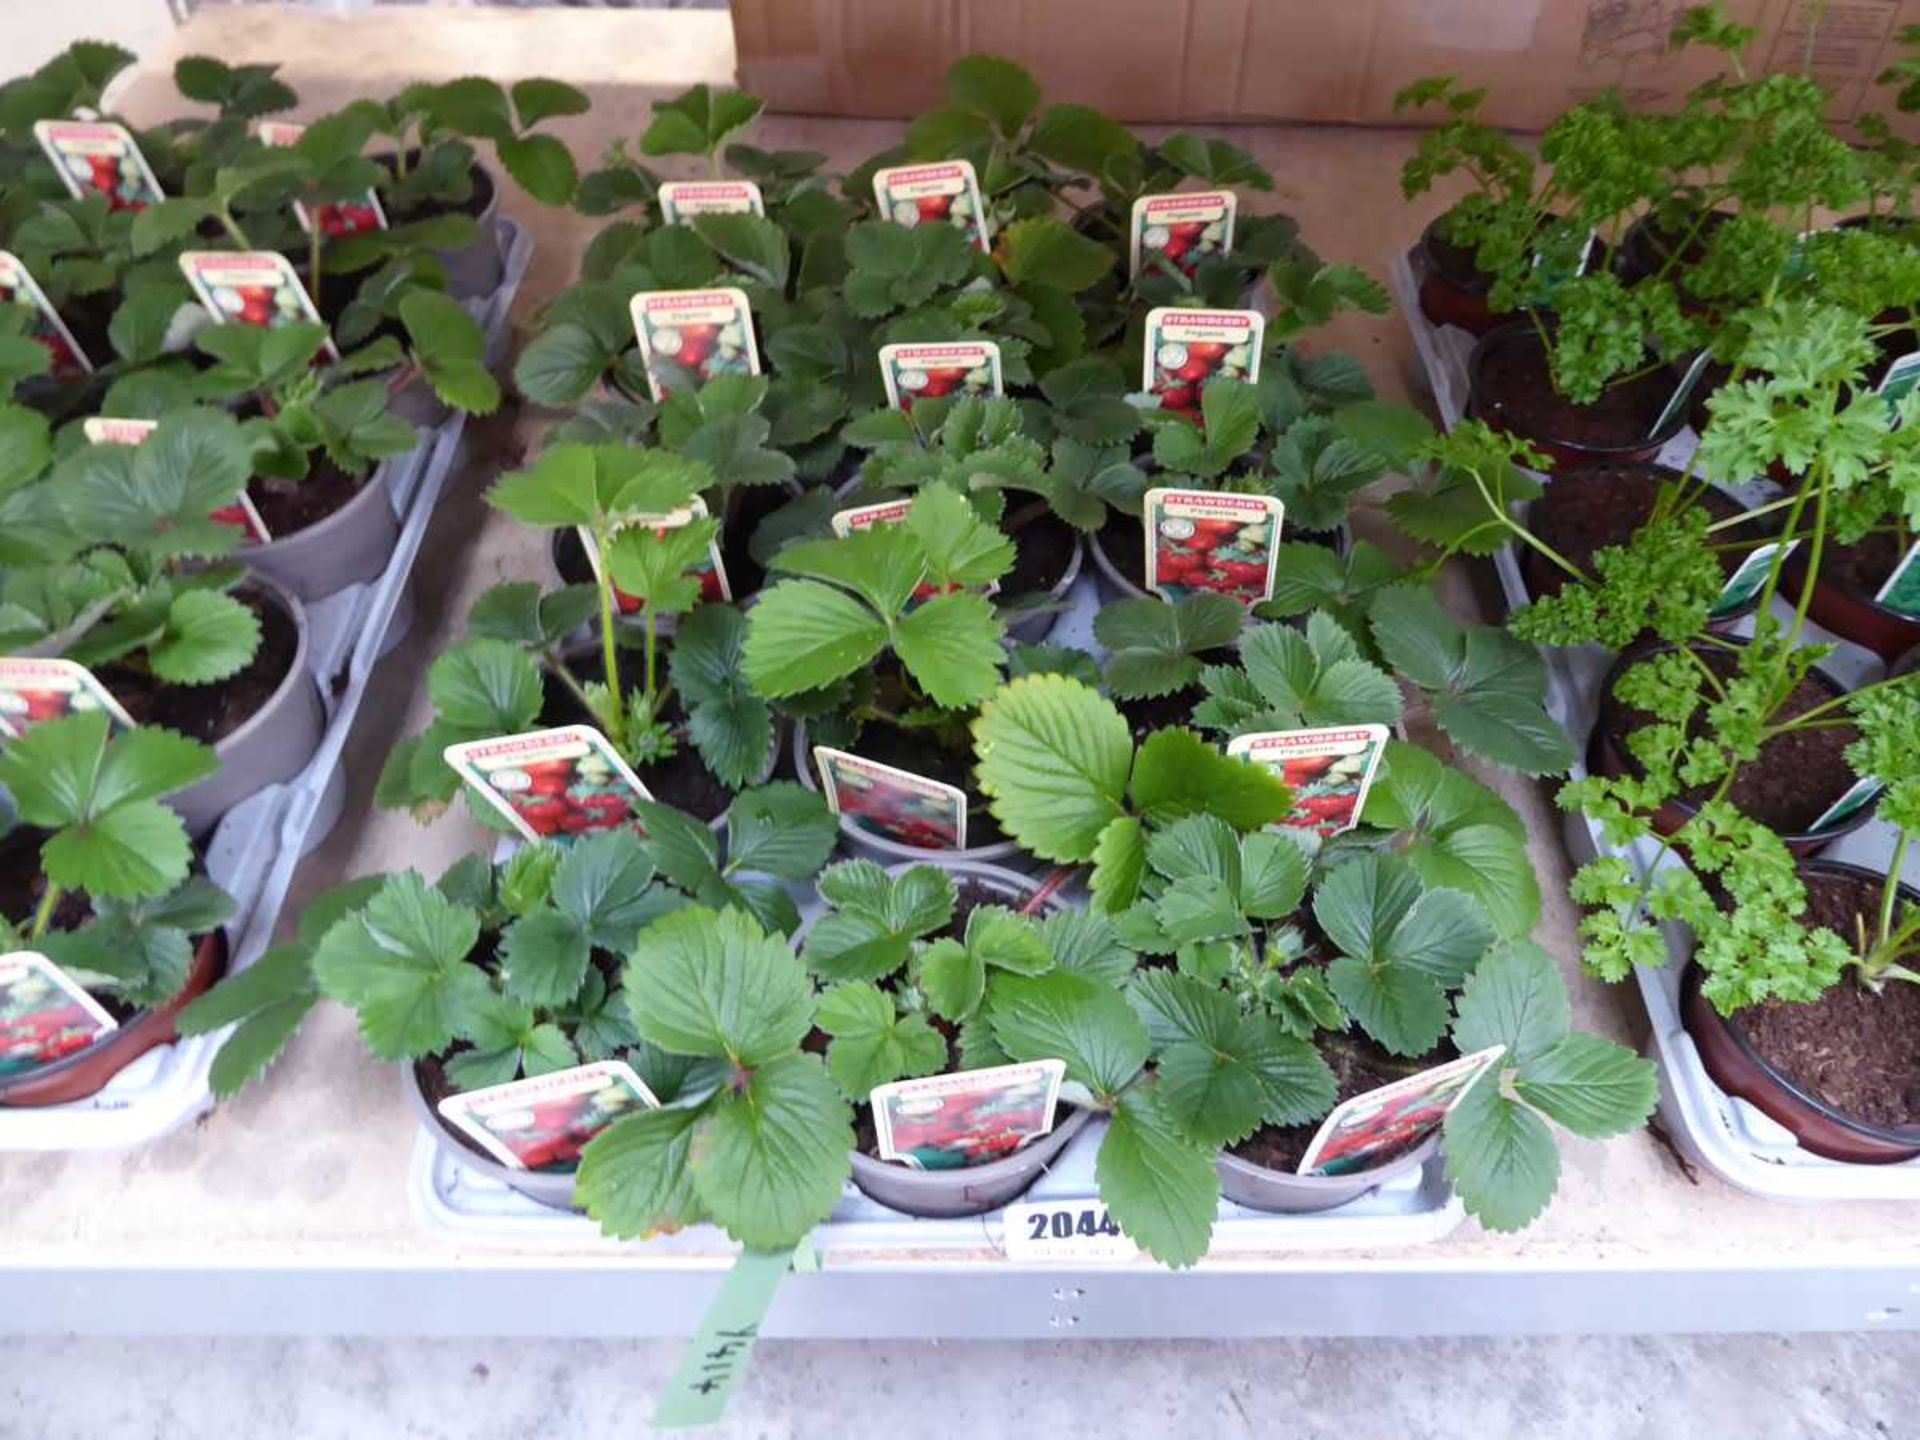 Tray containing 15 pots of Pegasus strawberry plants